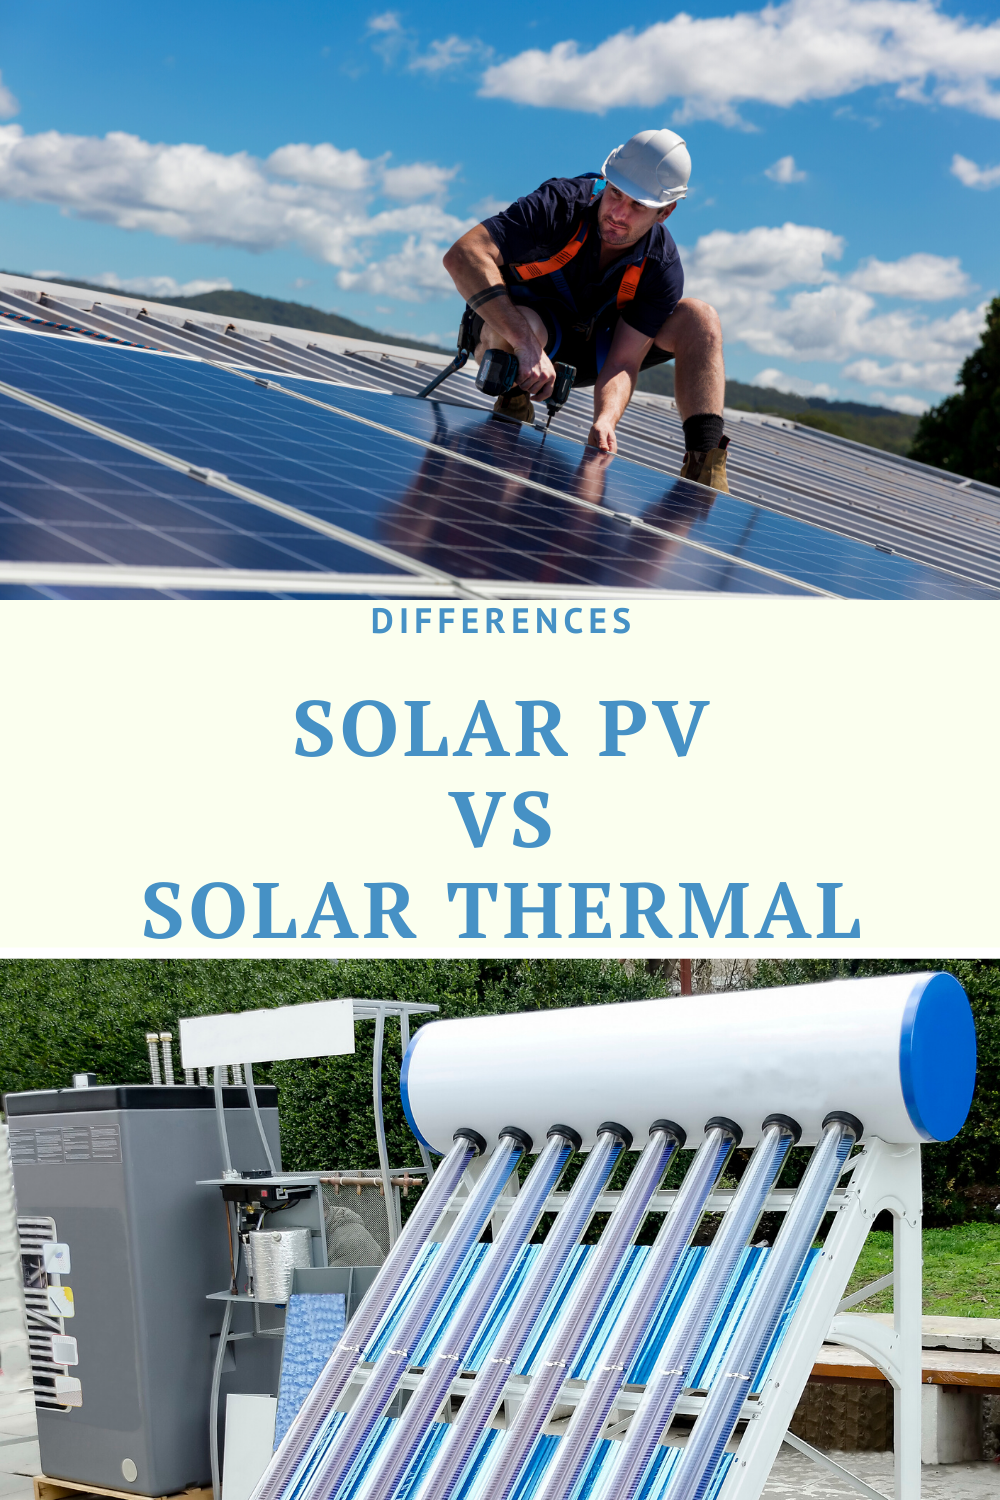 What is The Difference Between Solar Pv and Solar Thermal?